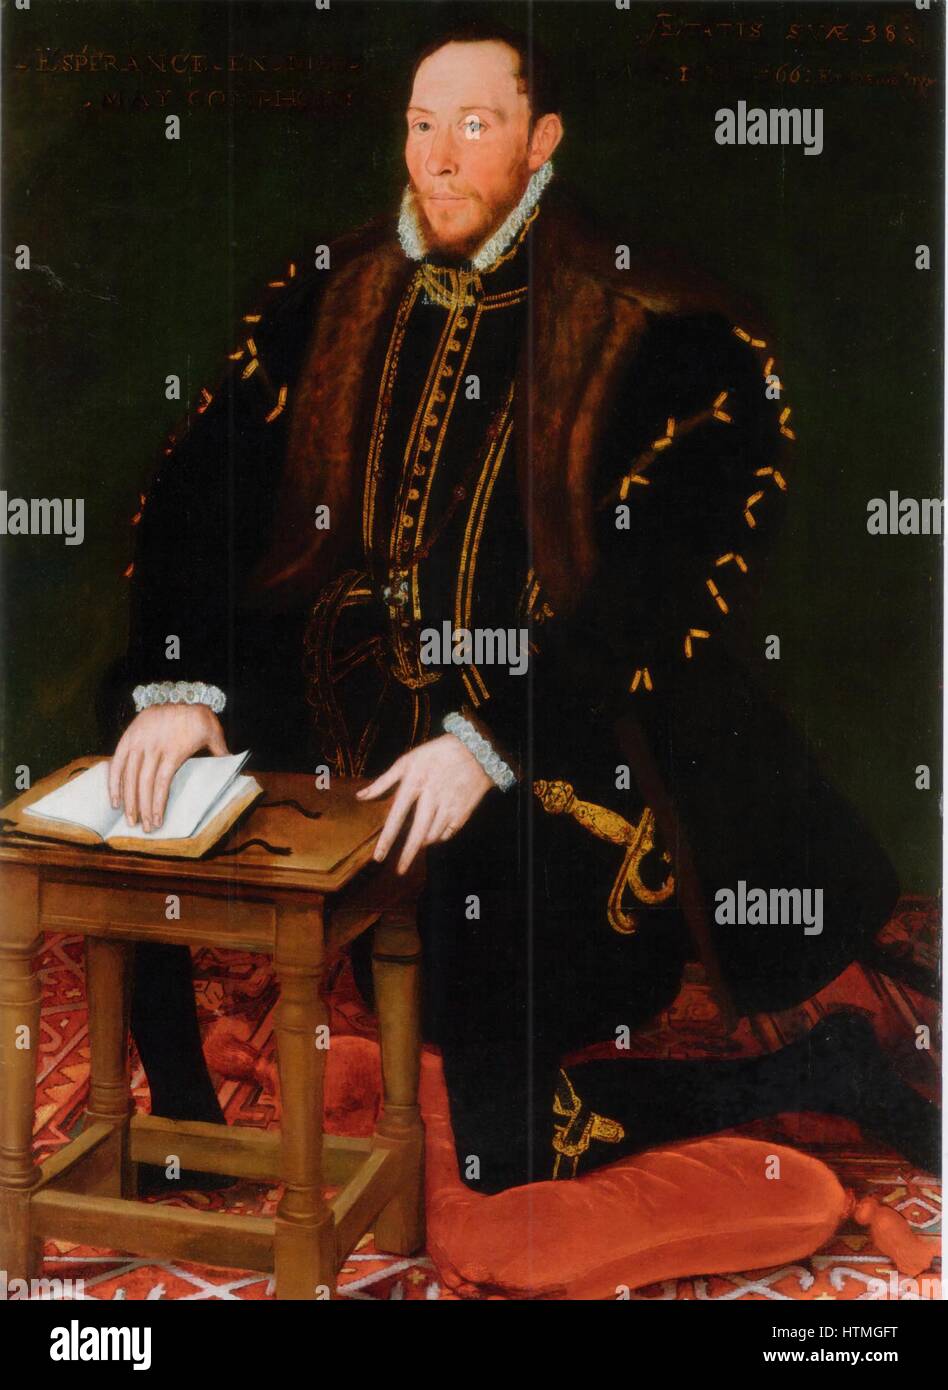 Thomas Percy, 7th Earl of Northumberland (1528-1572) English nobleman who followed the Roman Catholic faith. In 1569 led the Rising of the North in support of Mary Queen of Scots. When it failed he fled to Scotland but was handed over to the English, foun Stock Photo